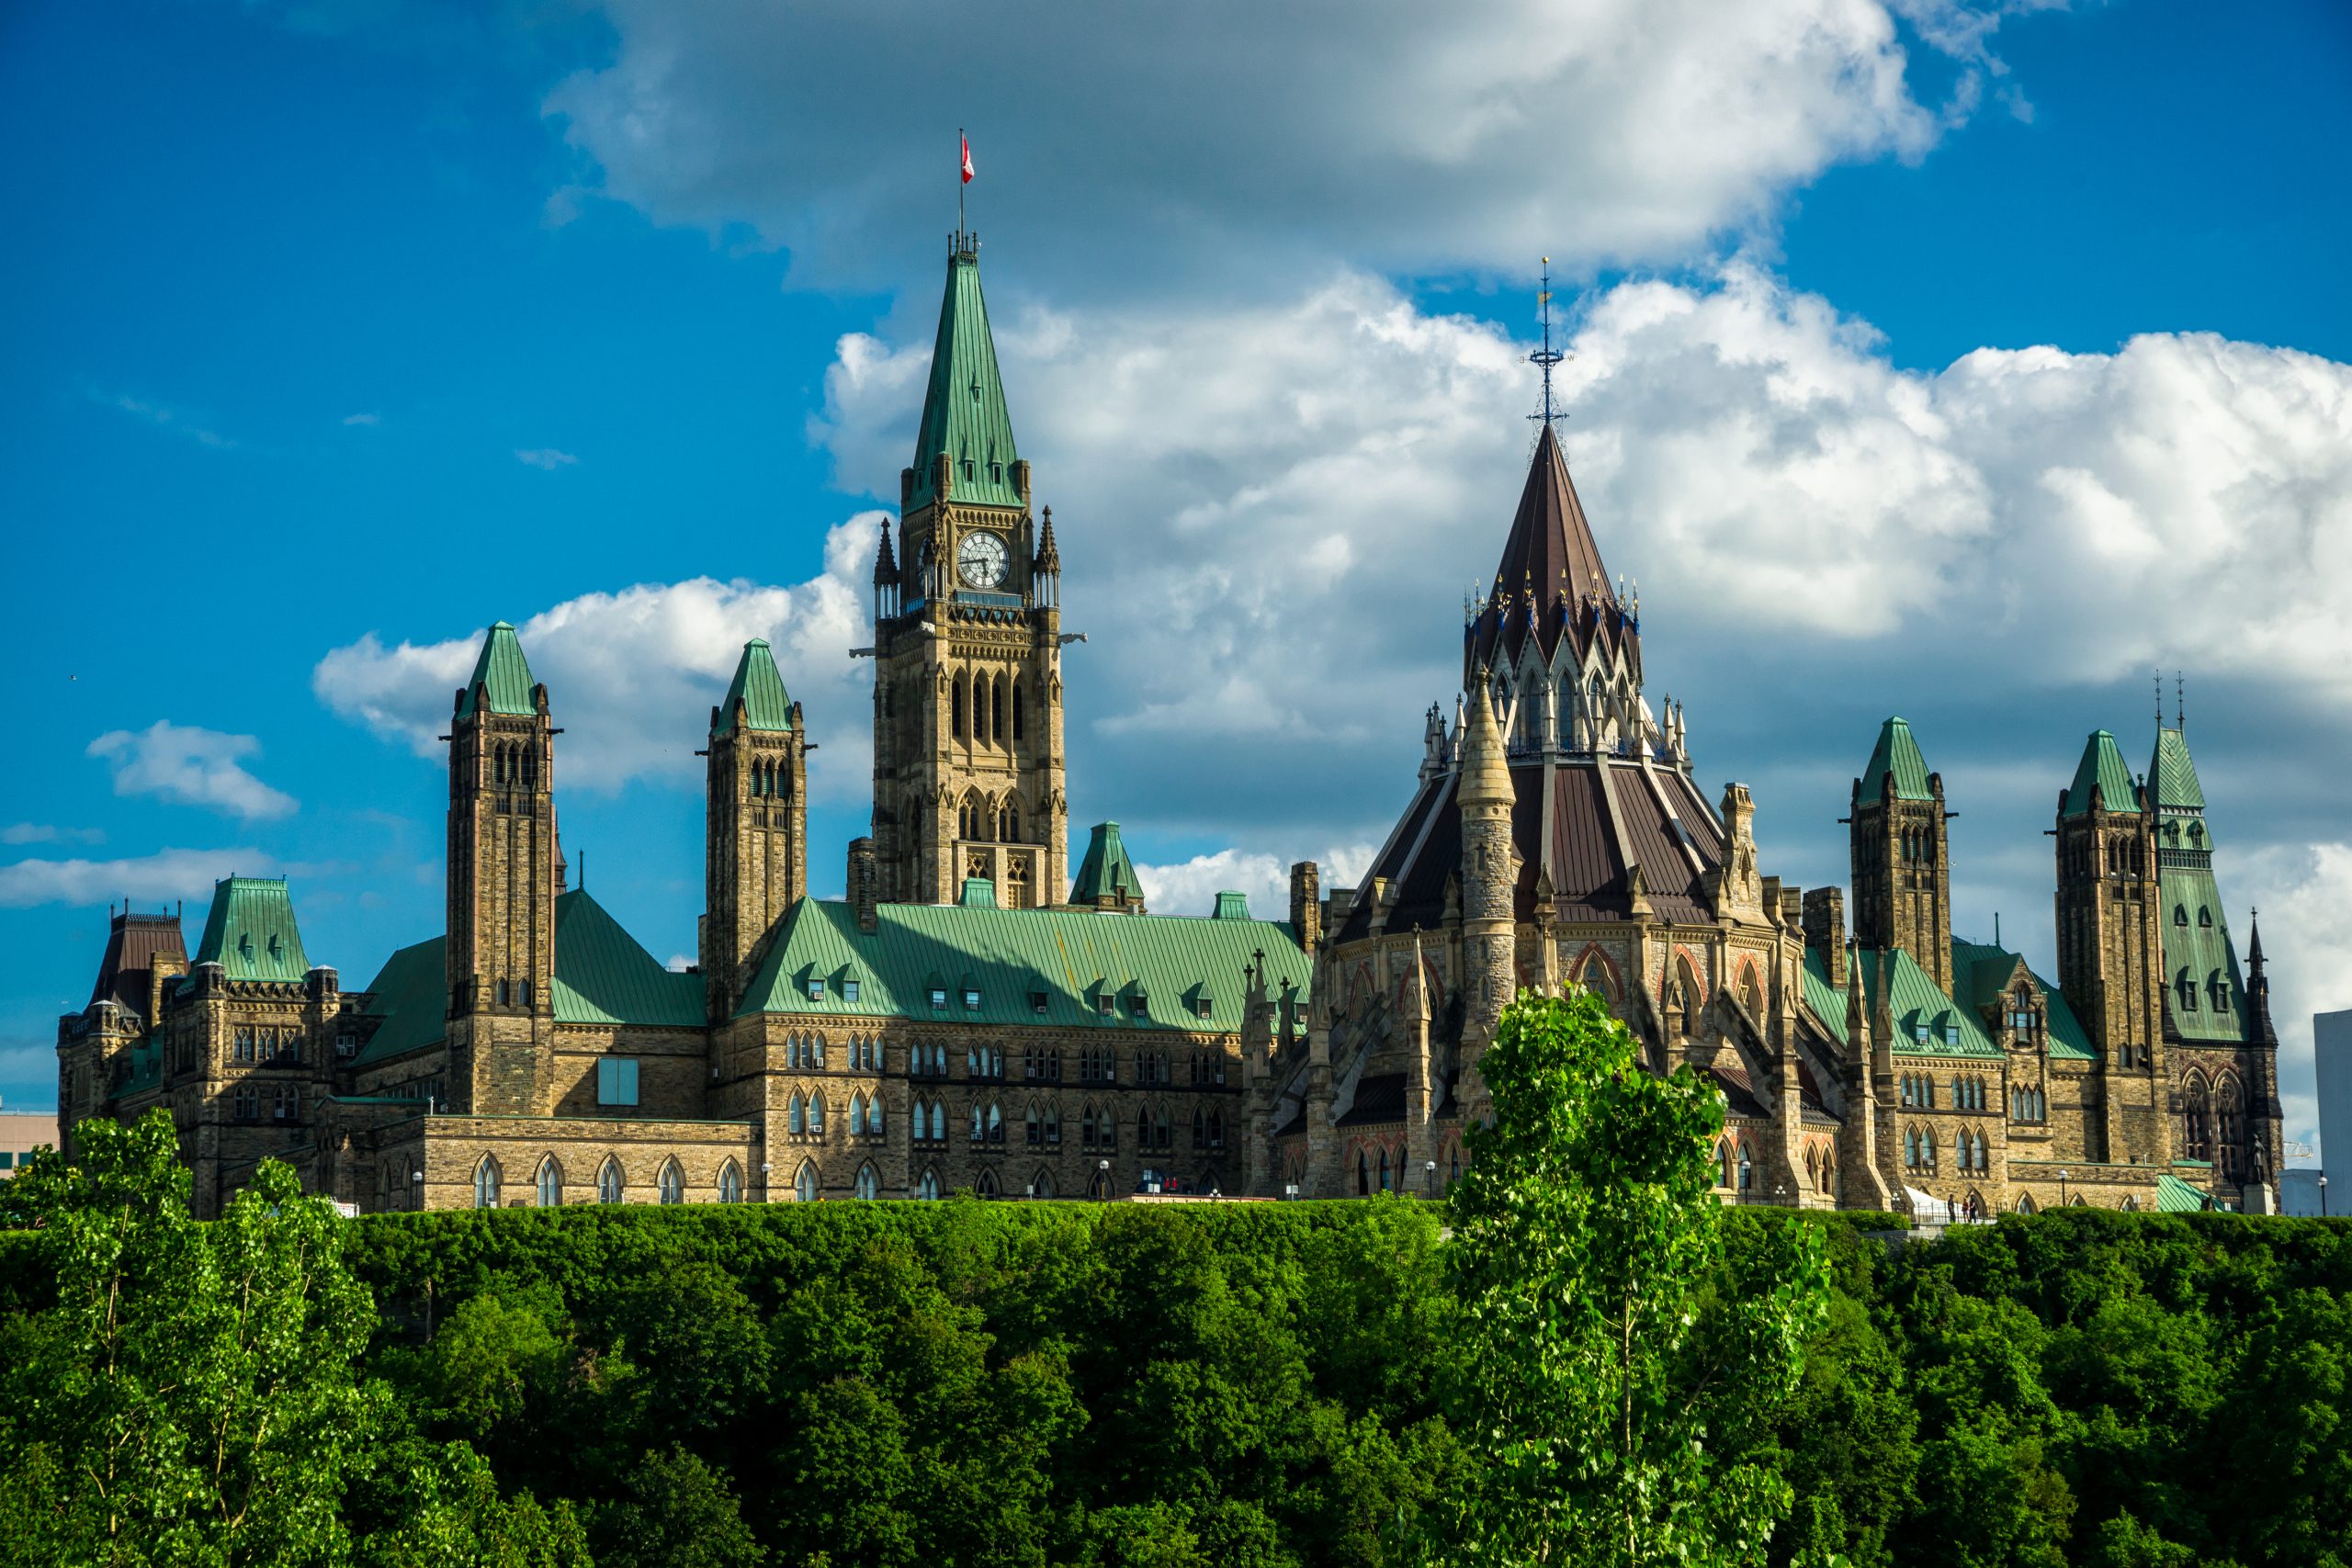 Canada's Parliament Hill and Parliament Buildings, the seat of the federal government of Canada, taken from the back side of the building